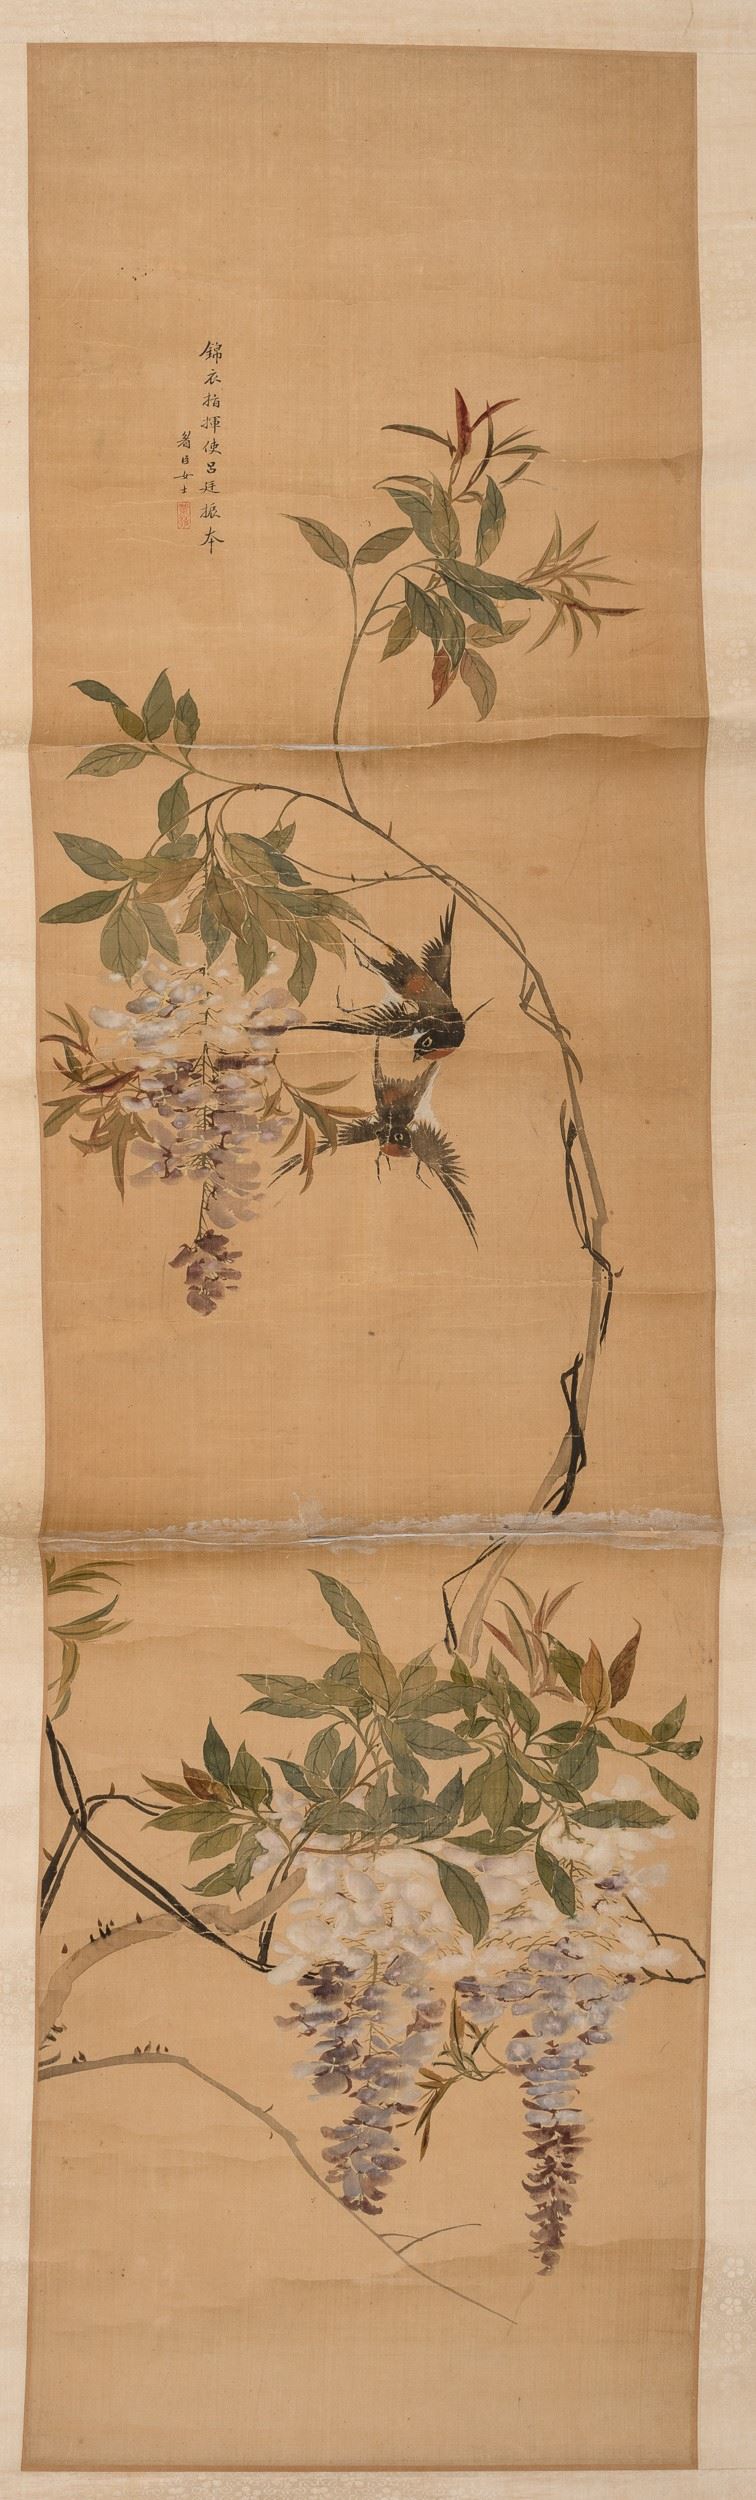 A painting on paper, China, Qing Dynasty  - Auction Asian Art - Cambi Casa d'Aste